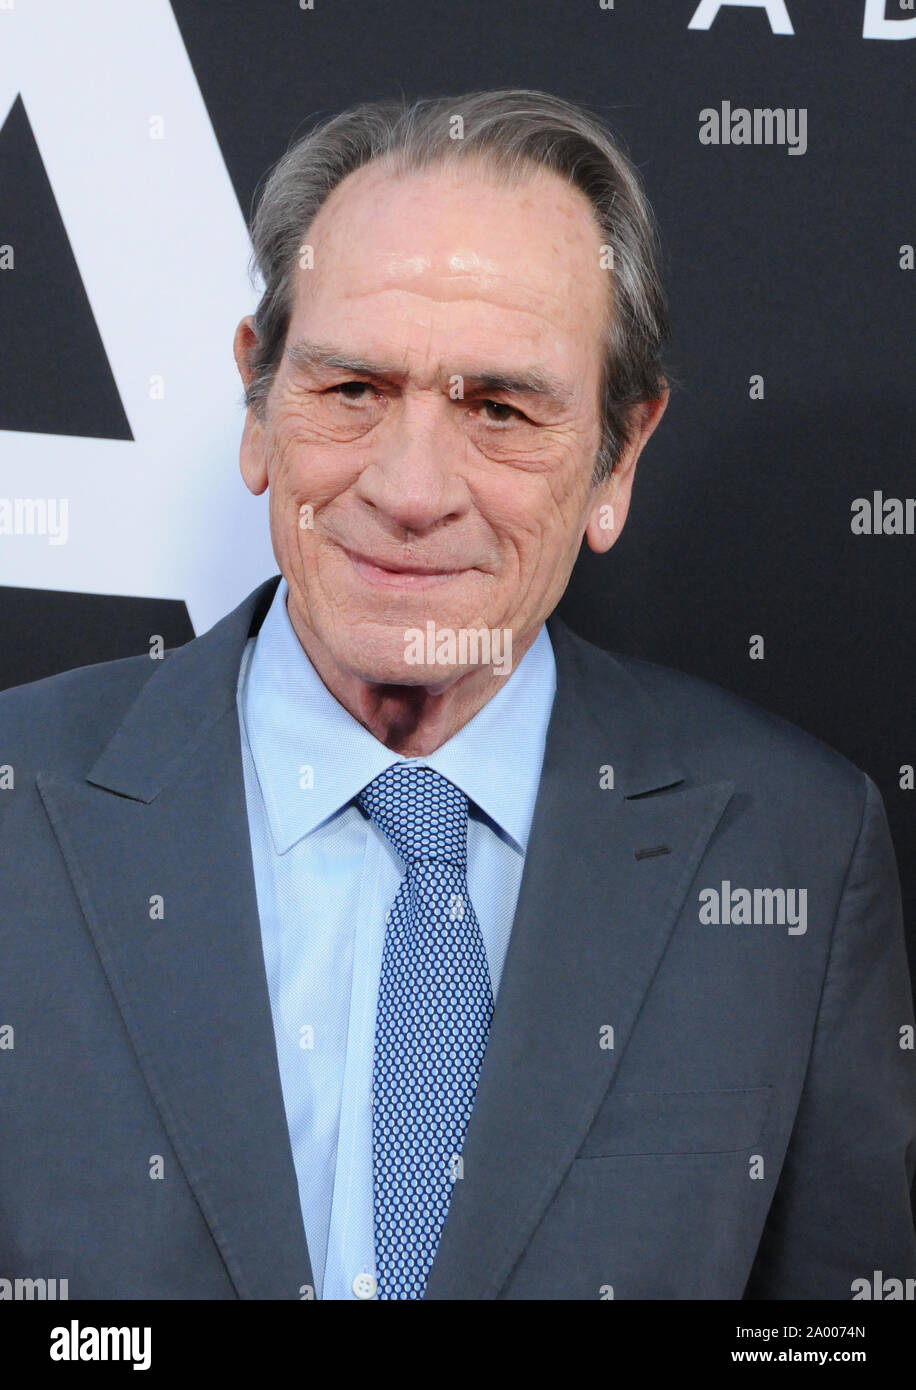 Hollywood, California, USA 18th September 2018 Actor Tommy Lee Jones attends 20th Century Fox's 'Ad Astra' Special Screening on September 18, 2018 at Cinerama Dome in Hollywood, California, USA. Photo by Barry King/Alamy Live News Stock Photo